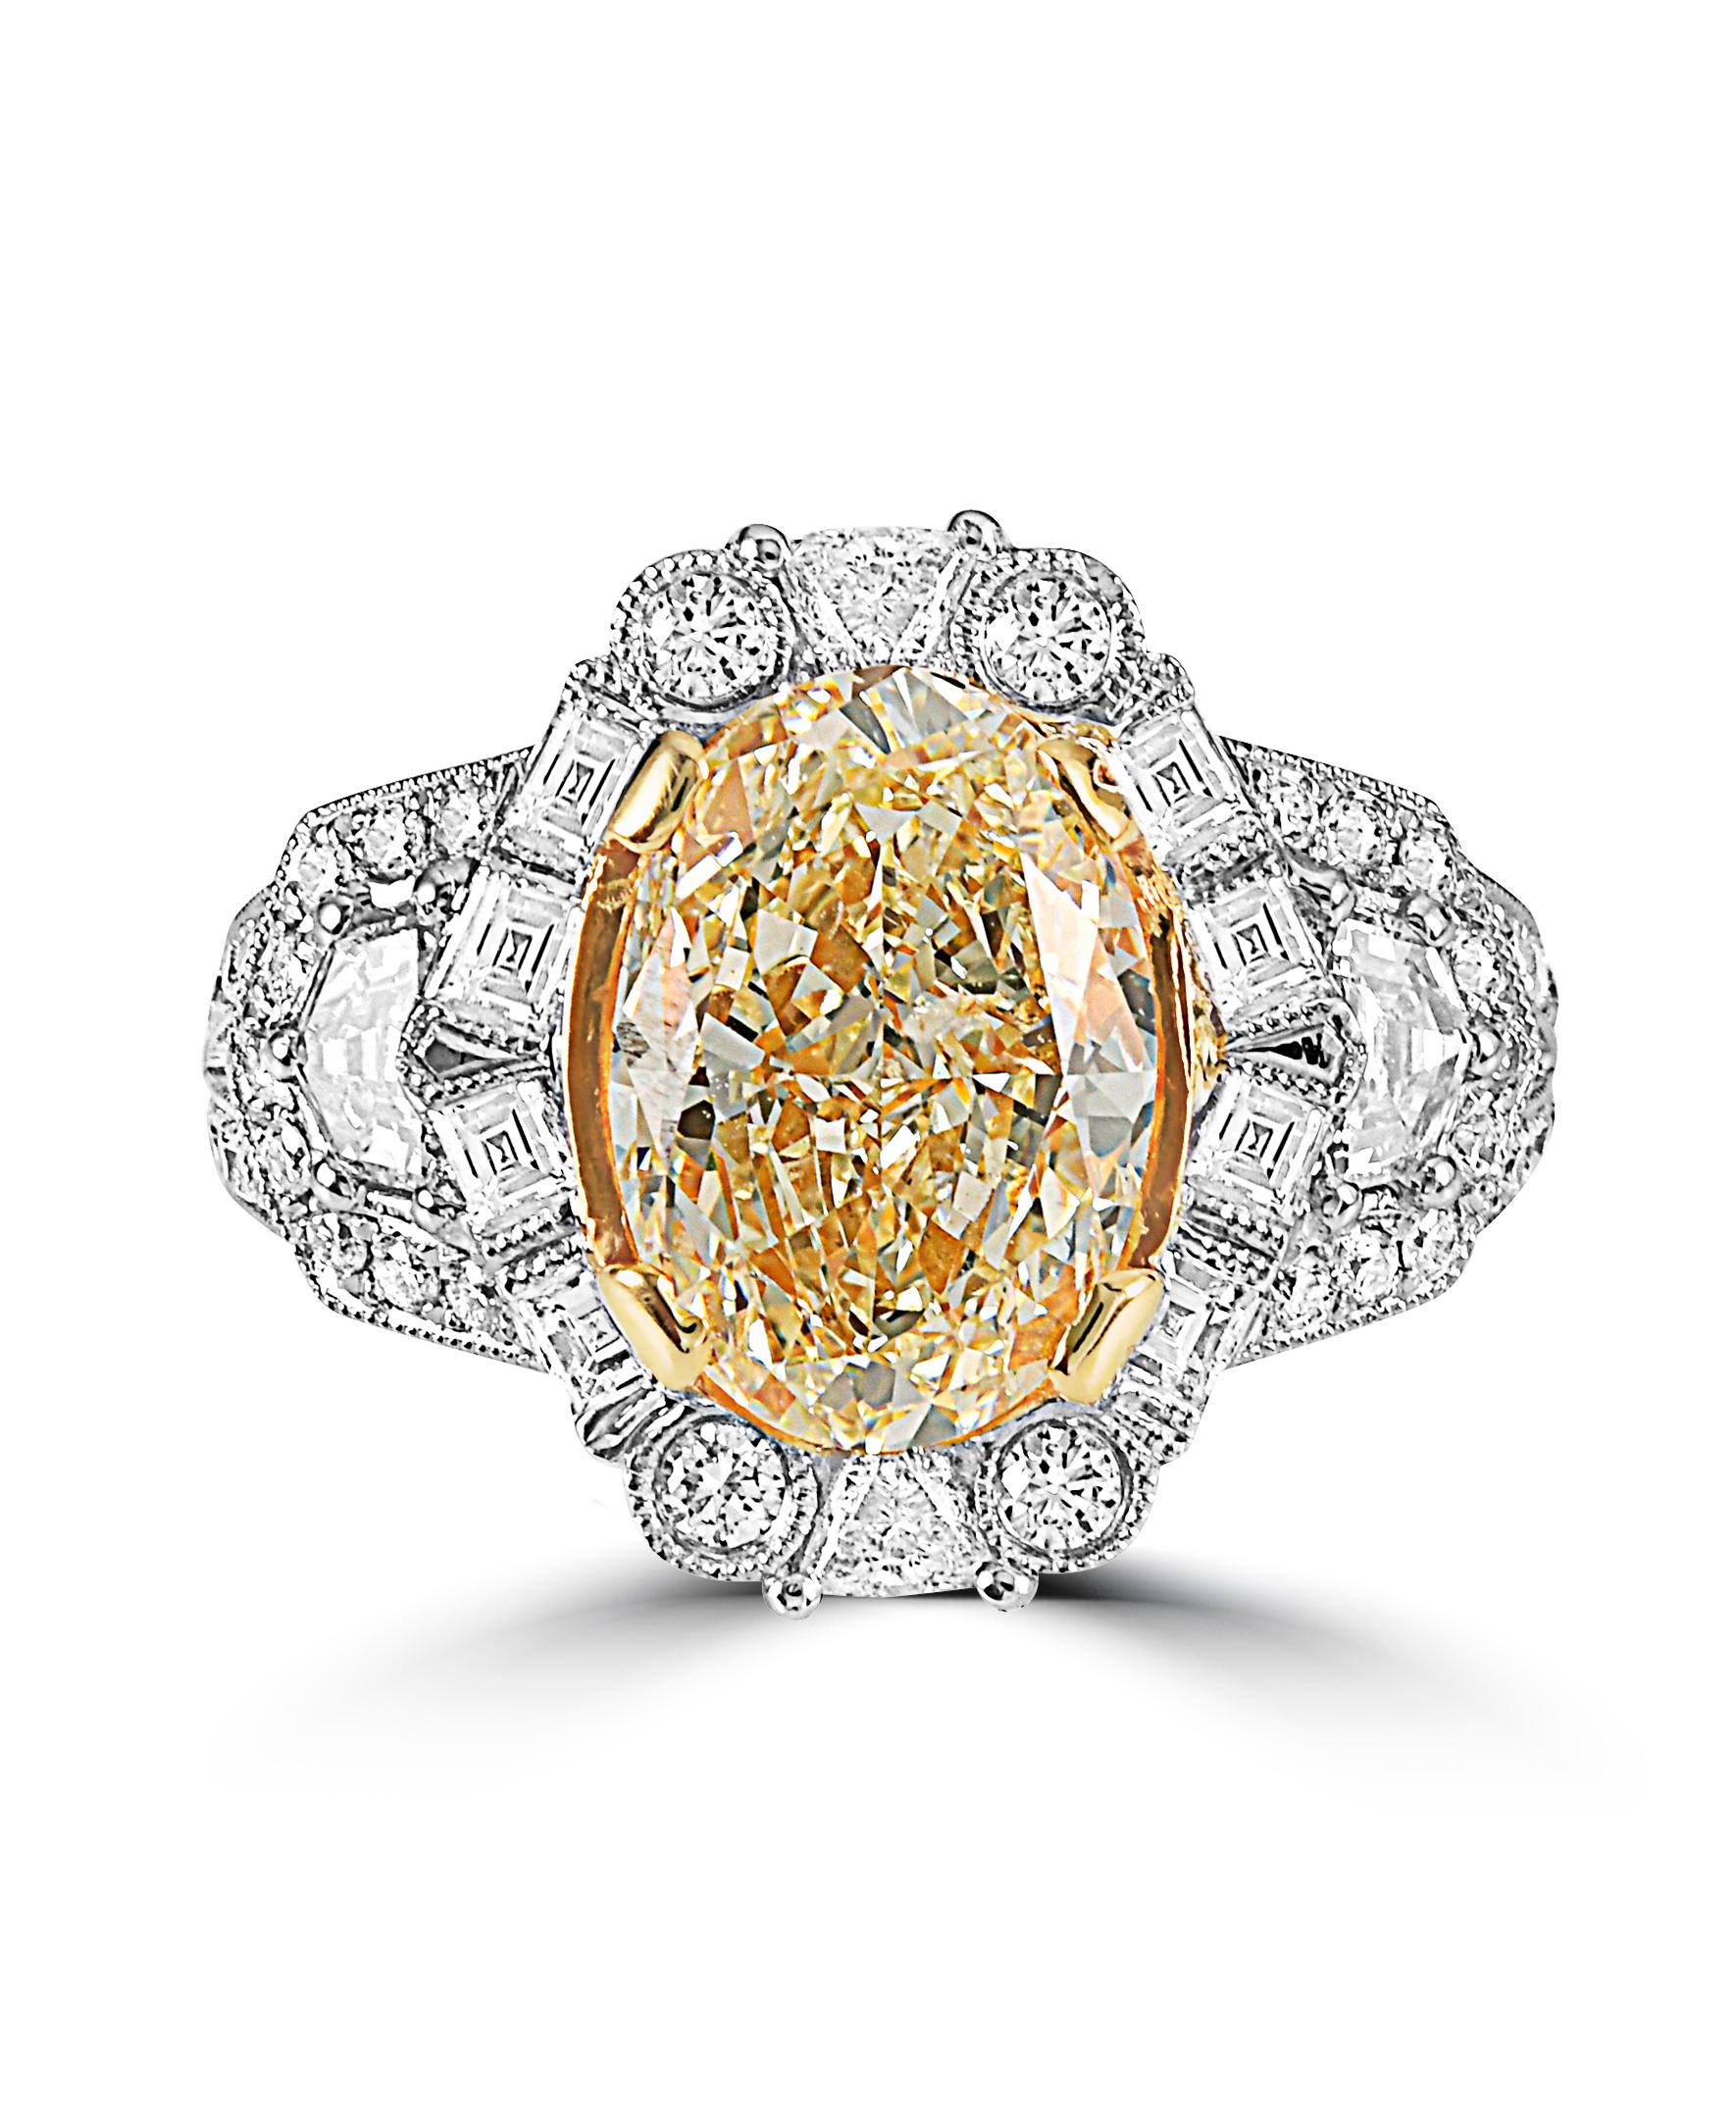 This Effy Hematian Collection ring is set in 18K White & Yellow gold. The design is set off with stunning Natural Yellow Diamond with a total weight of 4.02ct.
The diamond accent stones are a unique combination of round, square, triangle and half